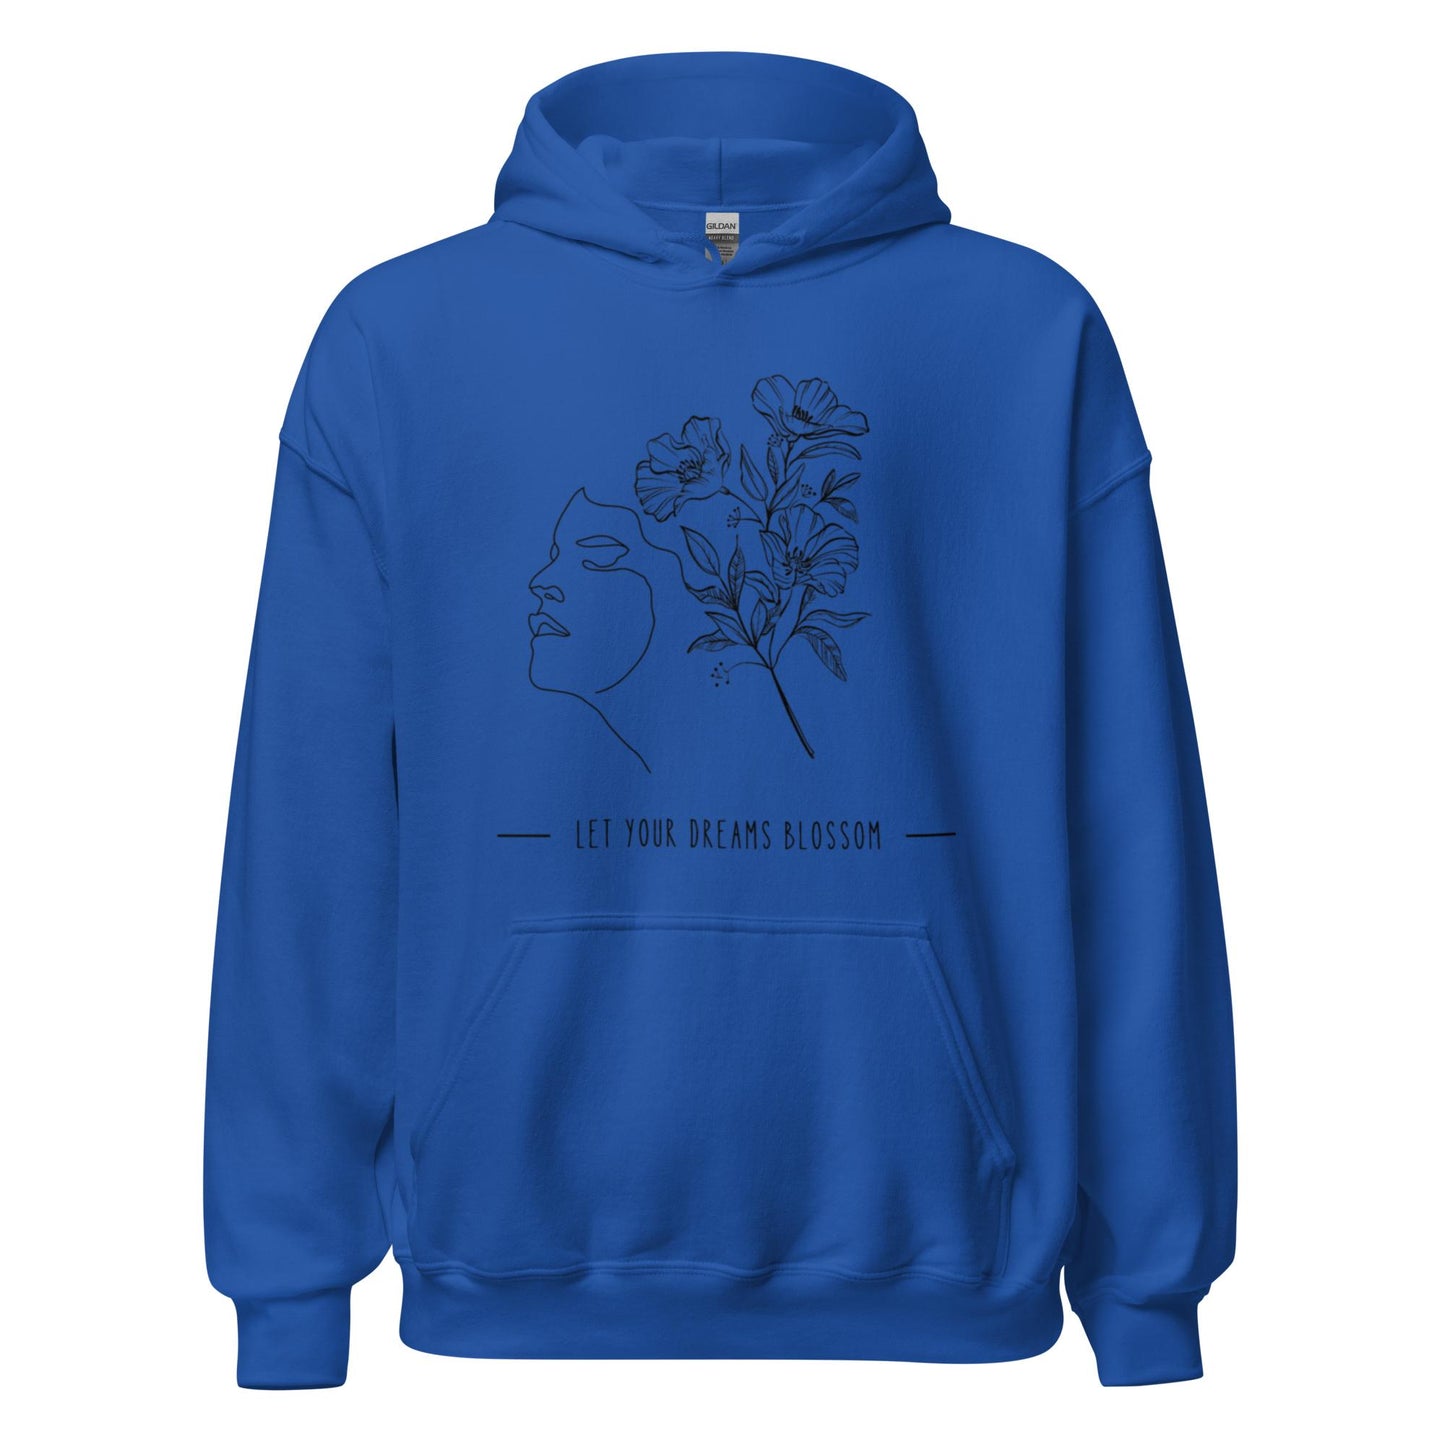 Let Your Dreams Blossom Hoodie